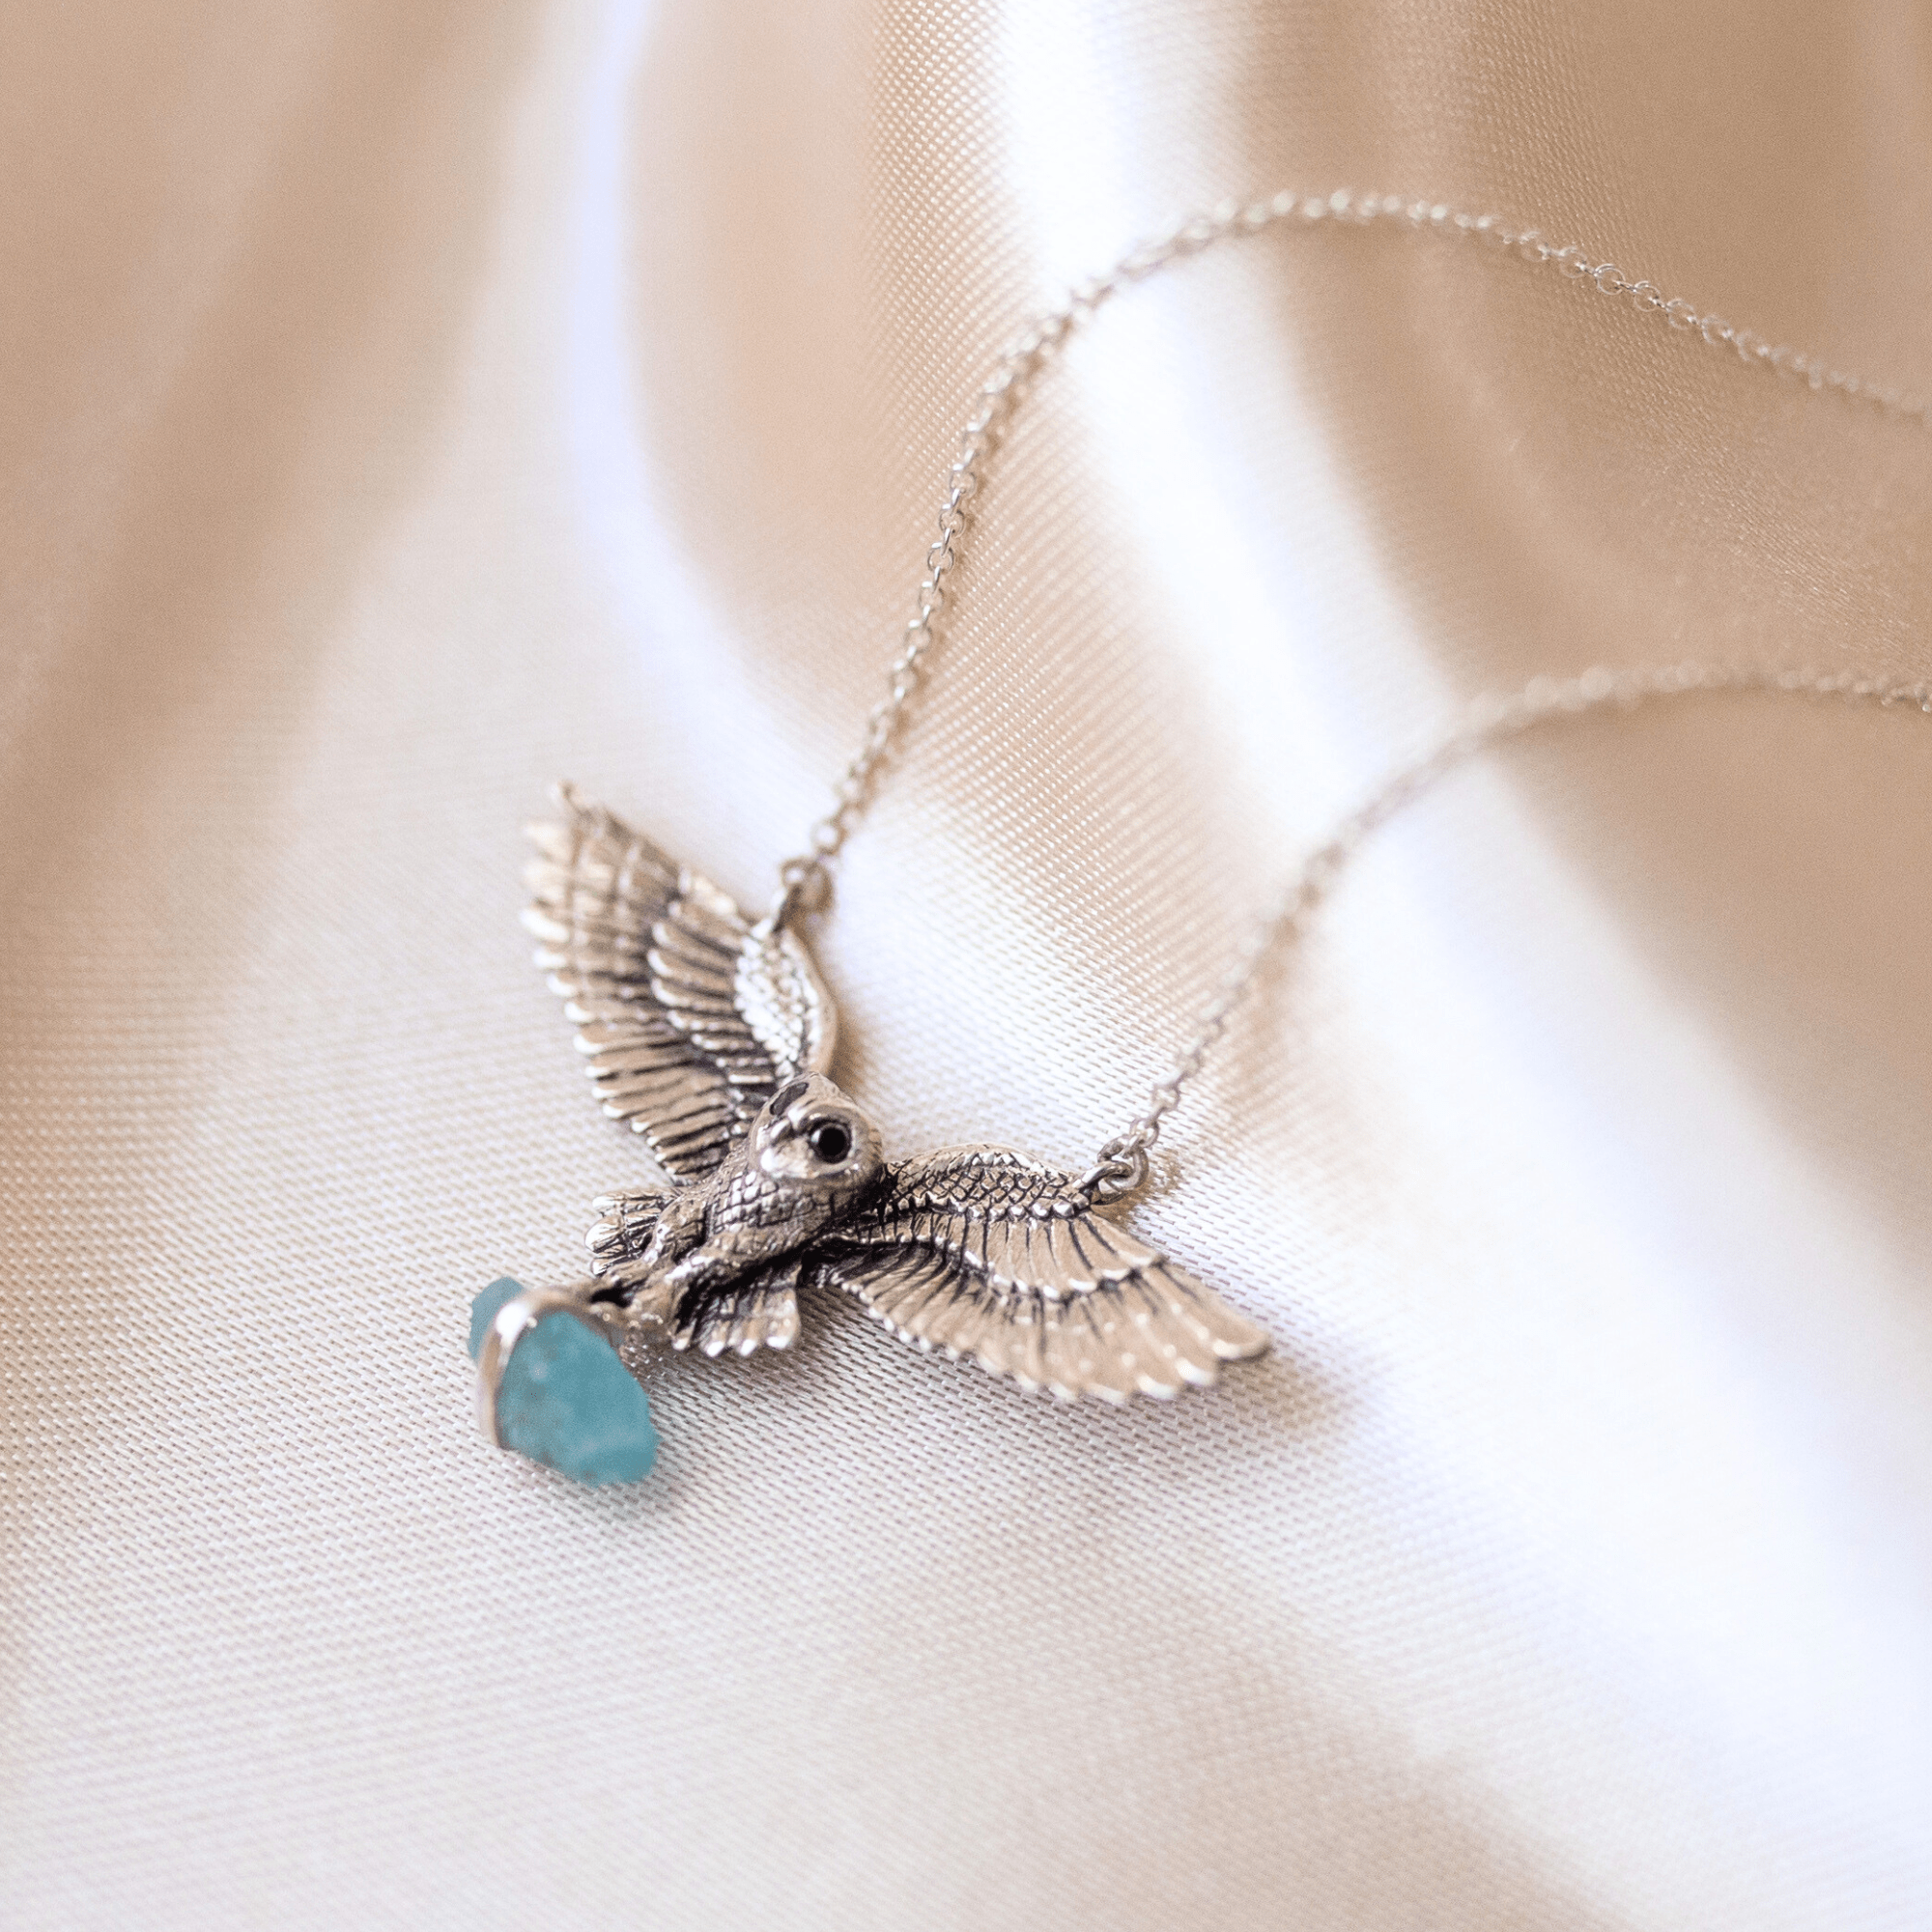 Jewelry Evolution Necklace Sterling Silver Owl "Wisdom & Truth" Necklace with Black Diamond and Apatite